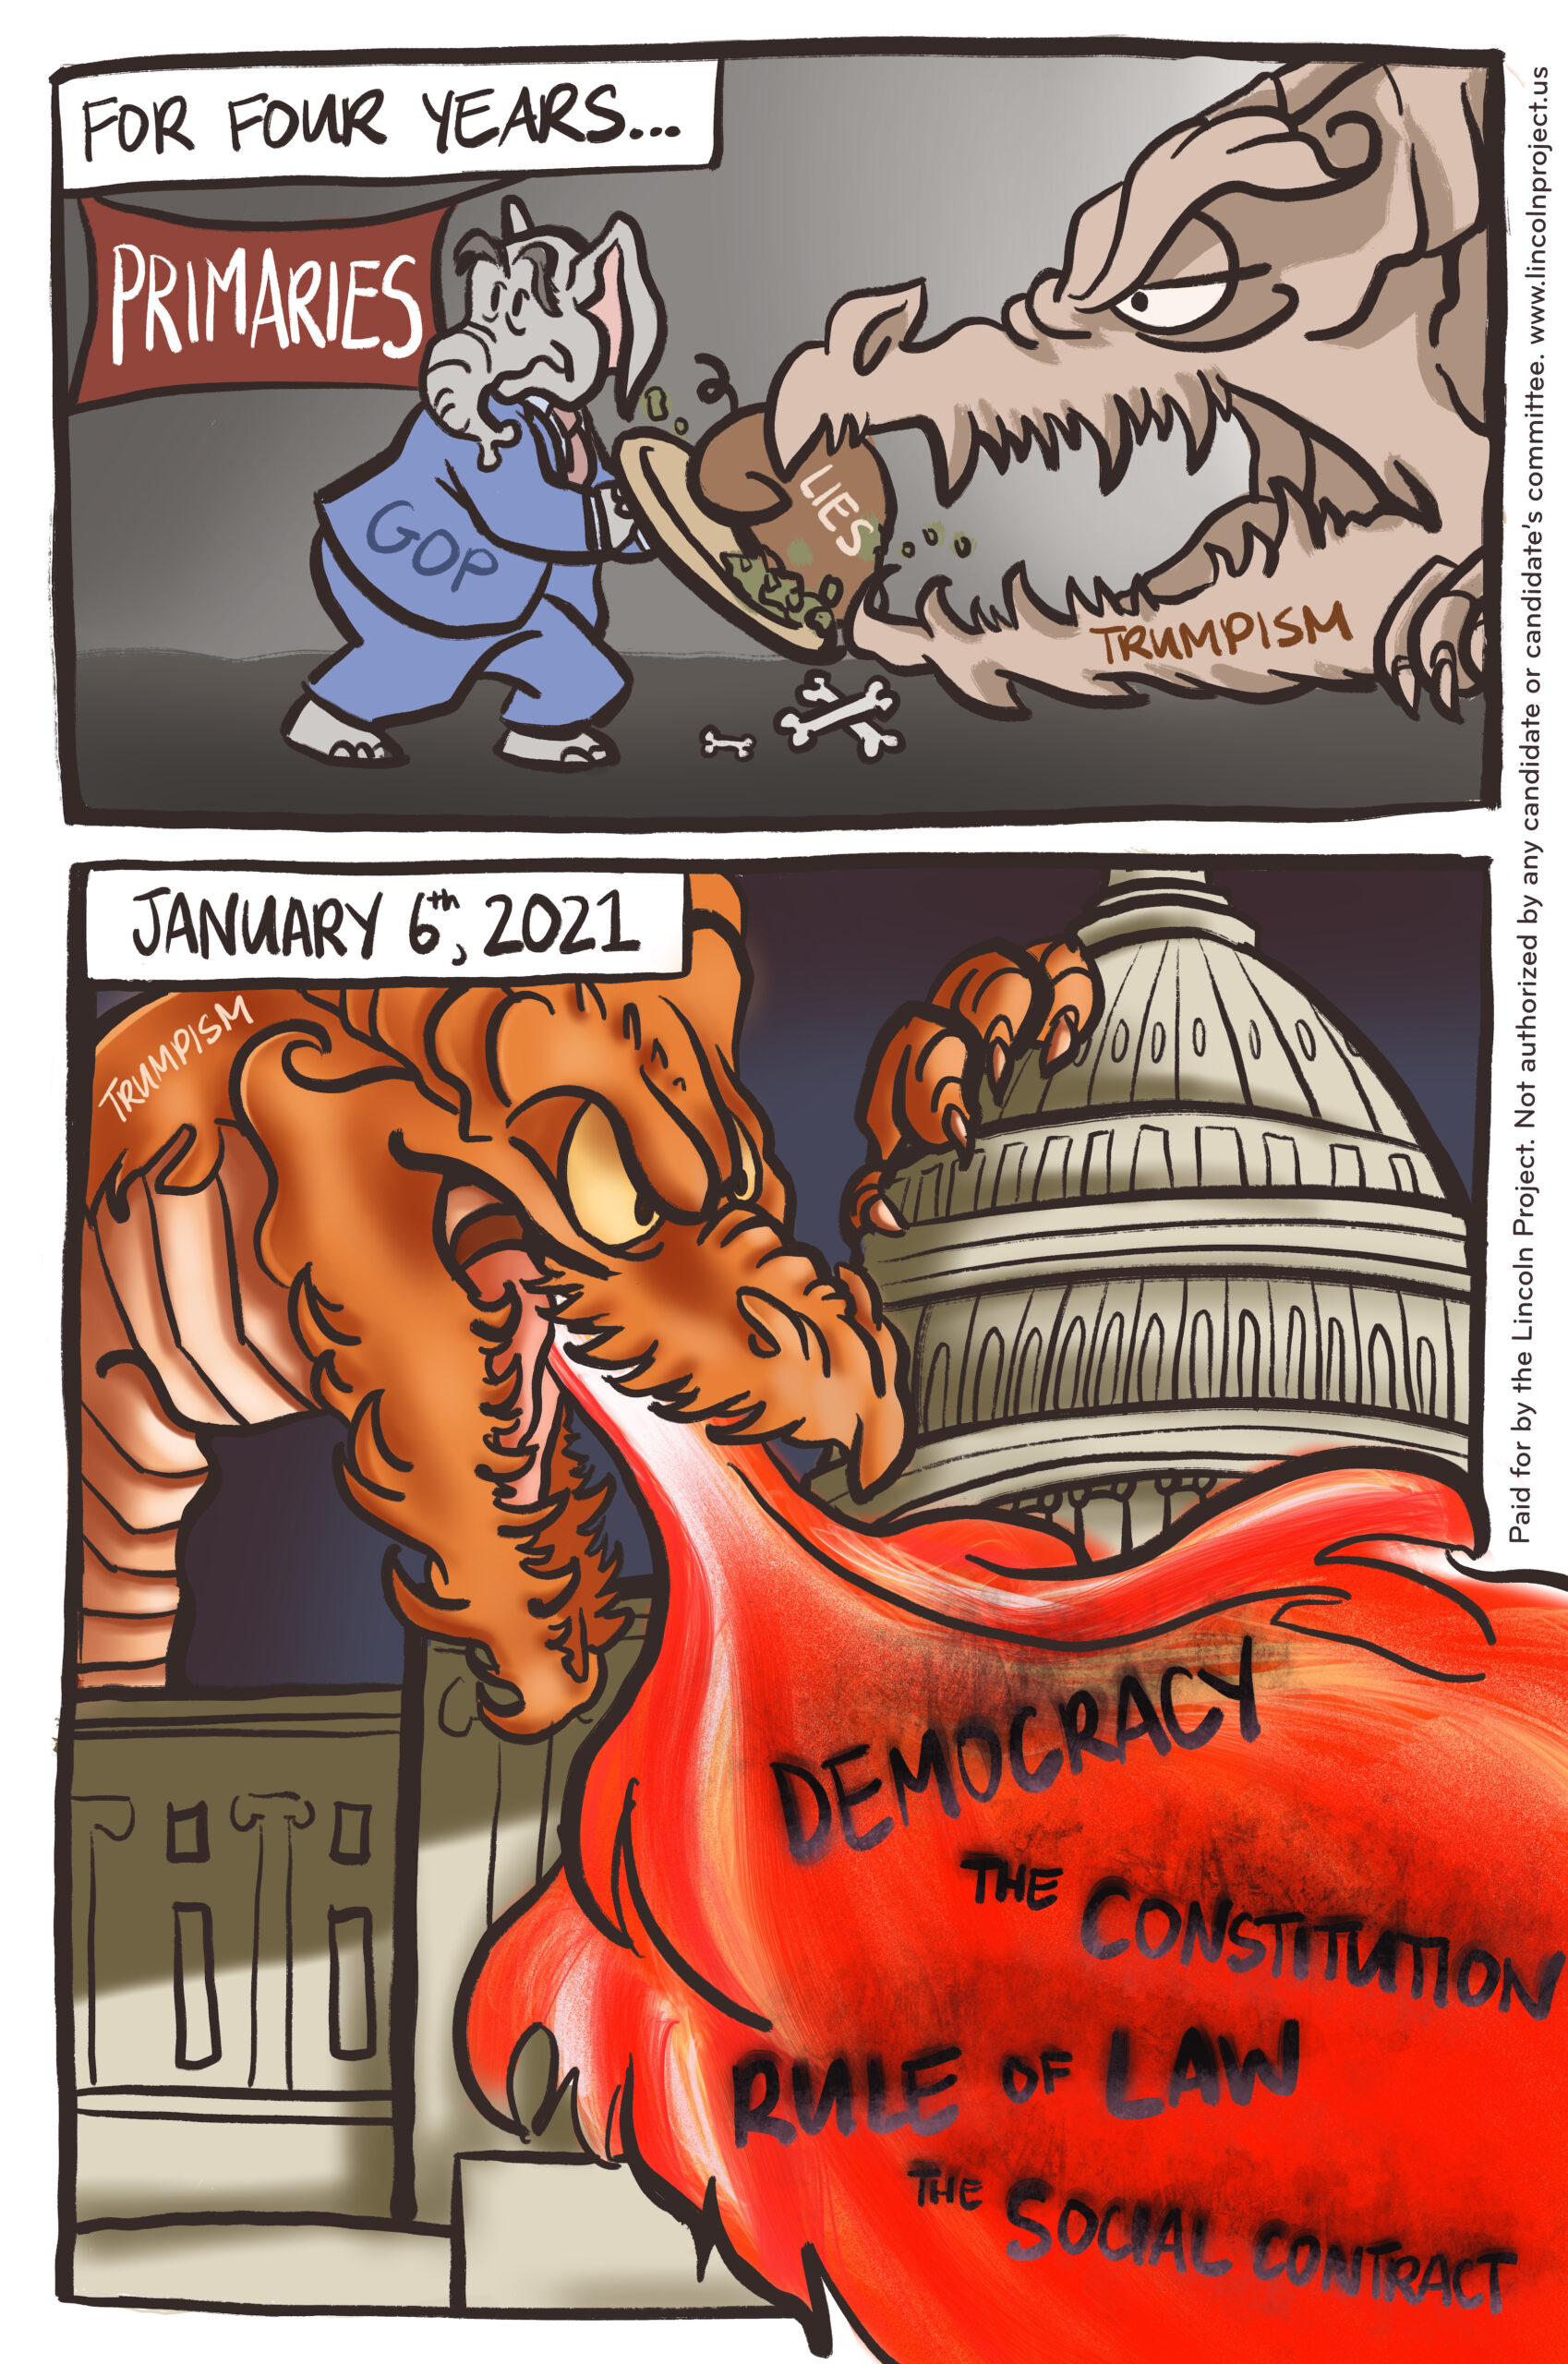 A cartoon in which the first panel depicts an elephant marked as the G.O.P. feeding a dragon lies. The following panel shows the dragon attacking the U.S. Capitol on January 6th.